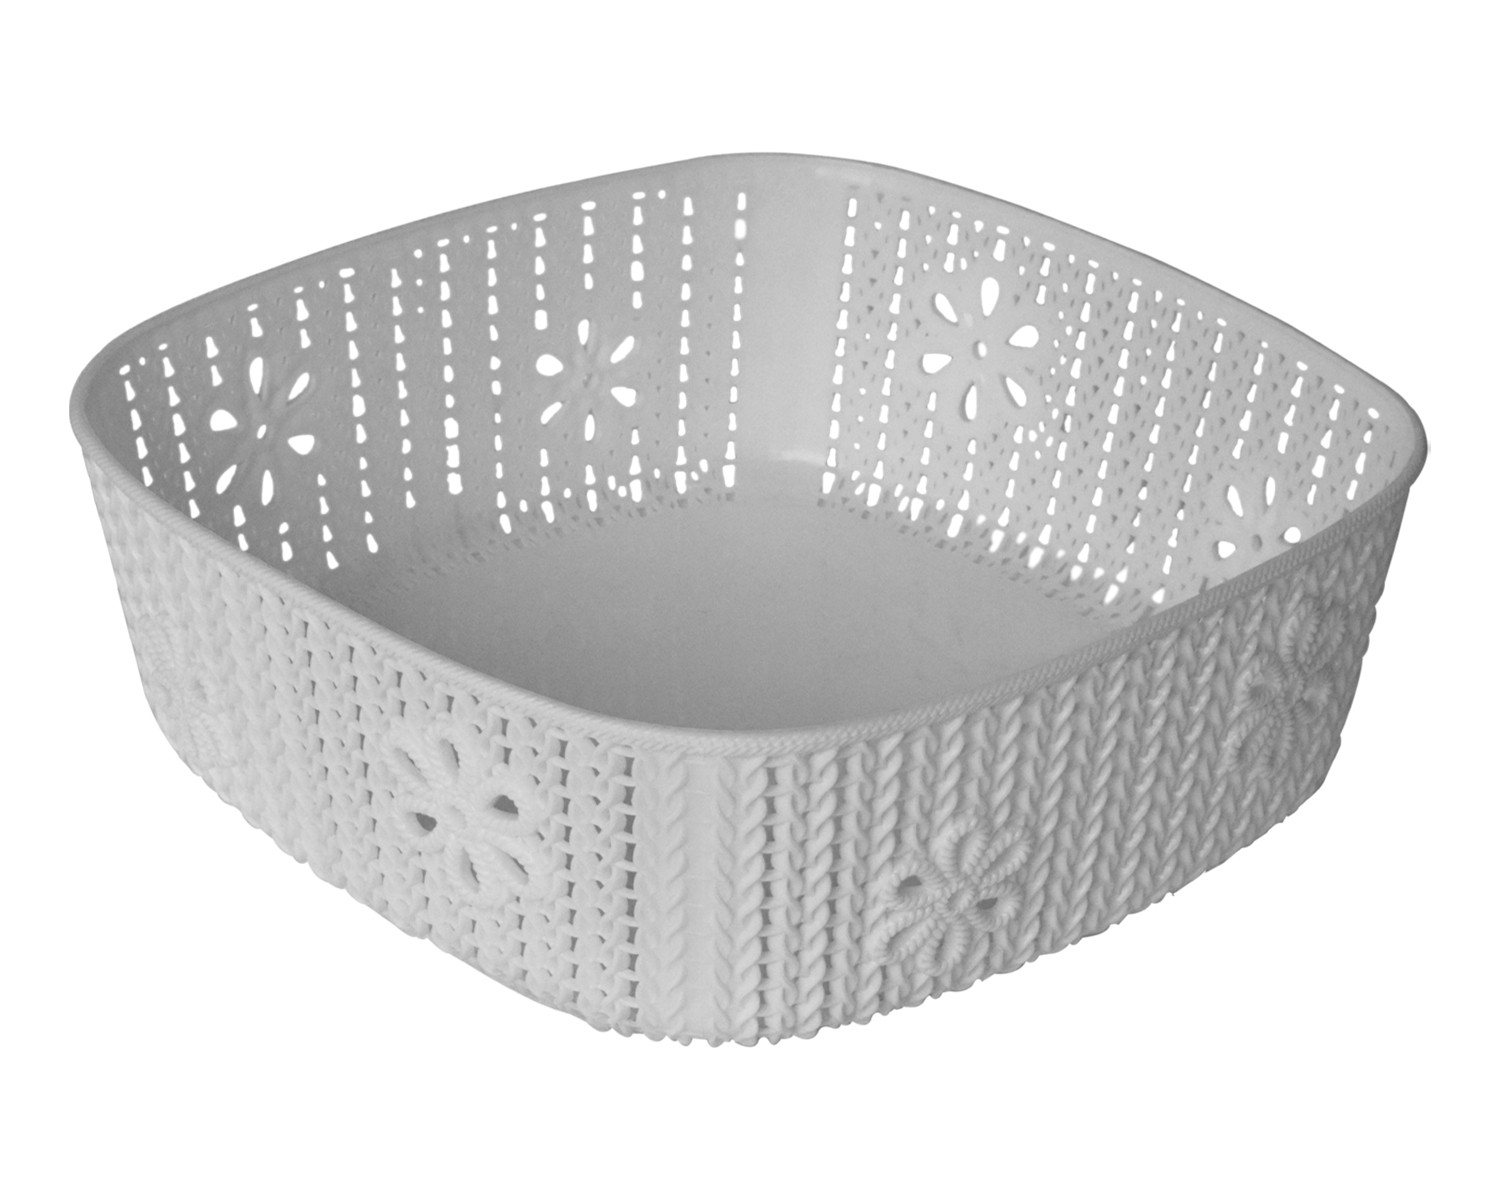 Kuber Industries Woven Design Multipurpose Square Shape Basket Ideal for Friuts, Vegetable, Toys Small, Medium, Large Pack of 3 (Grey)